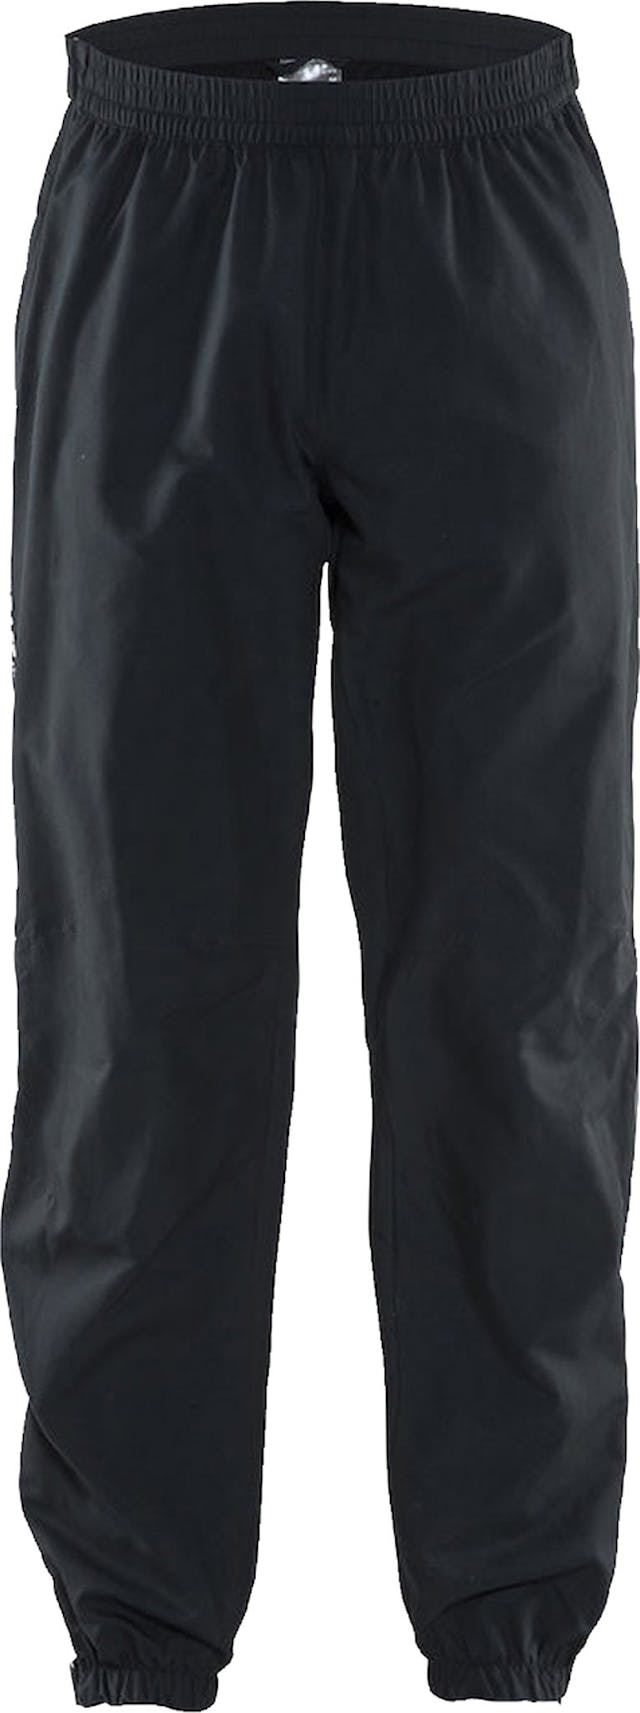 Product image for Cruise Pants - Men's